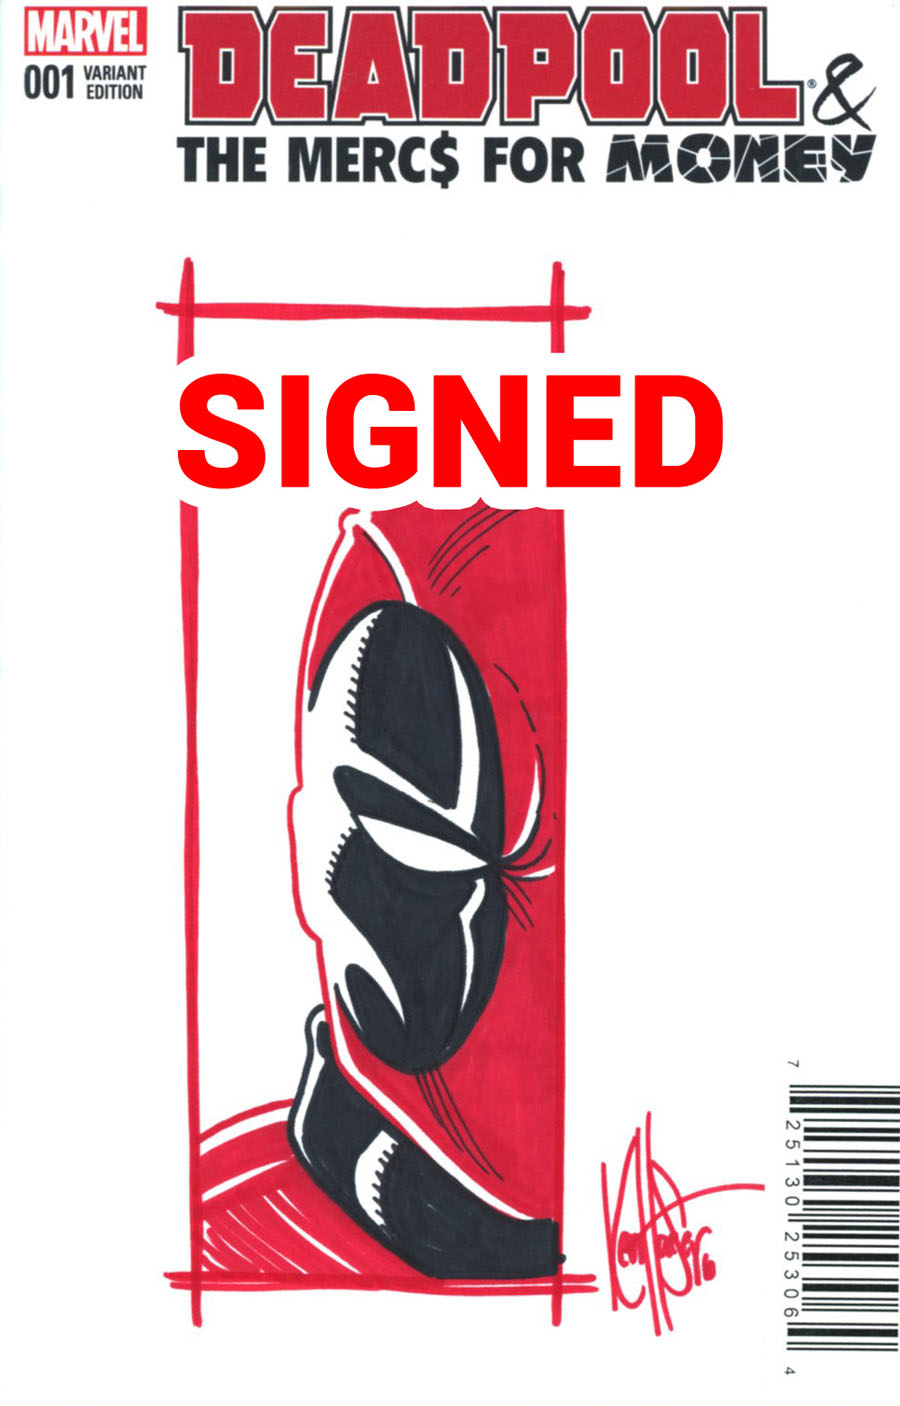 Deadpool And The Mercs For Money Vol 2 #1 Cover G DF Signed & Remarked By Ken Haeser